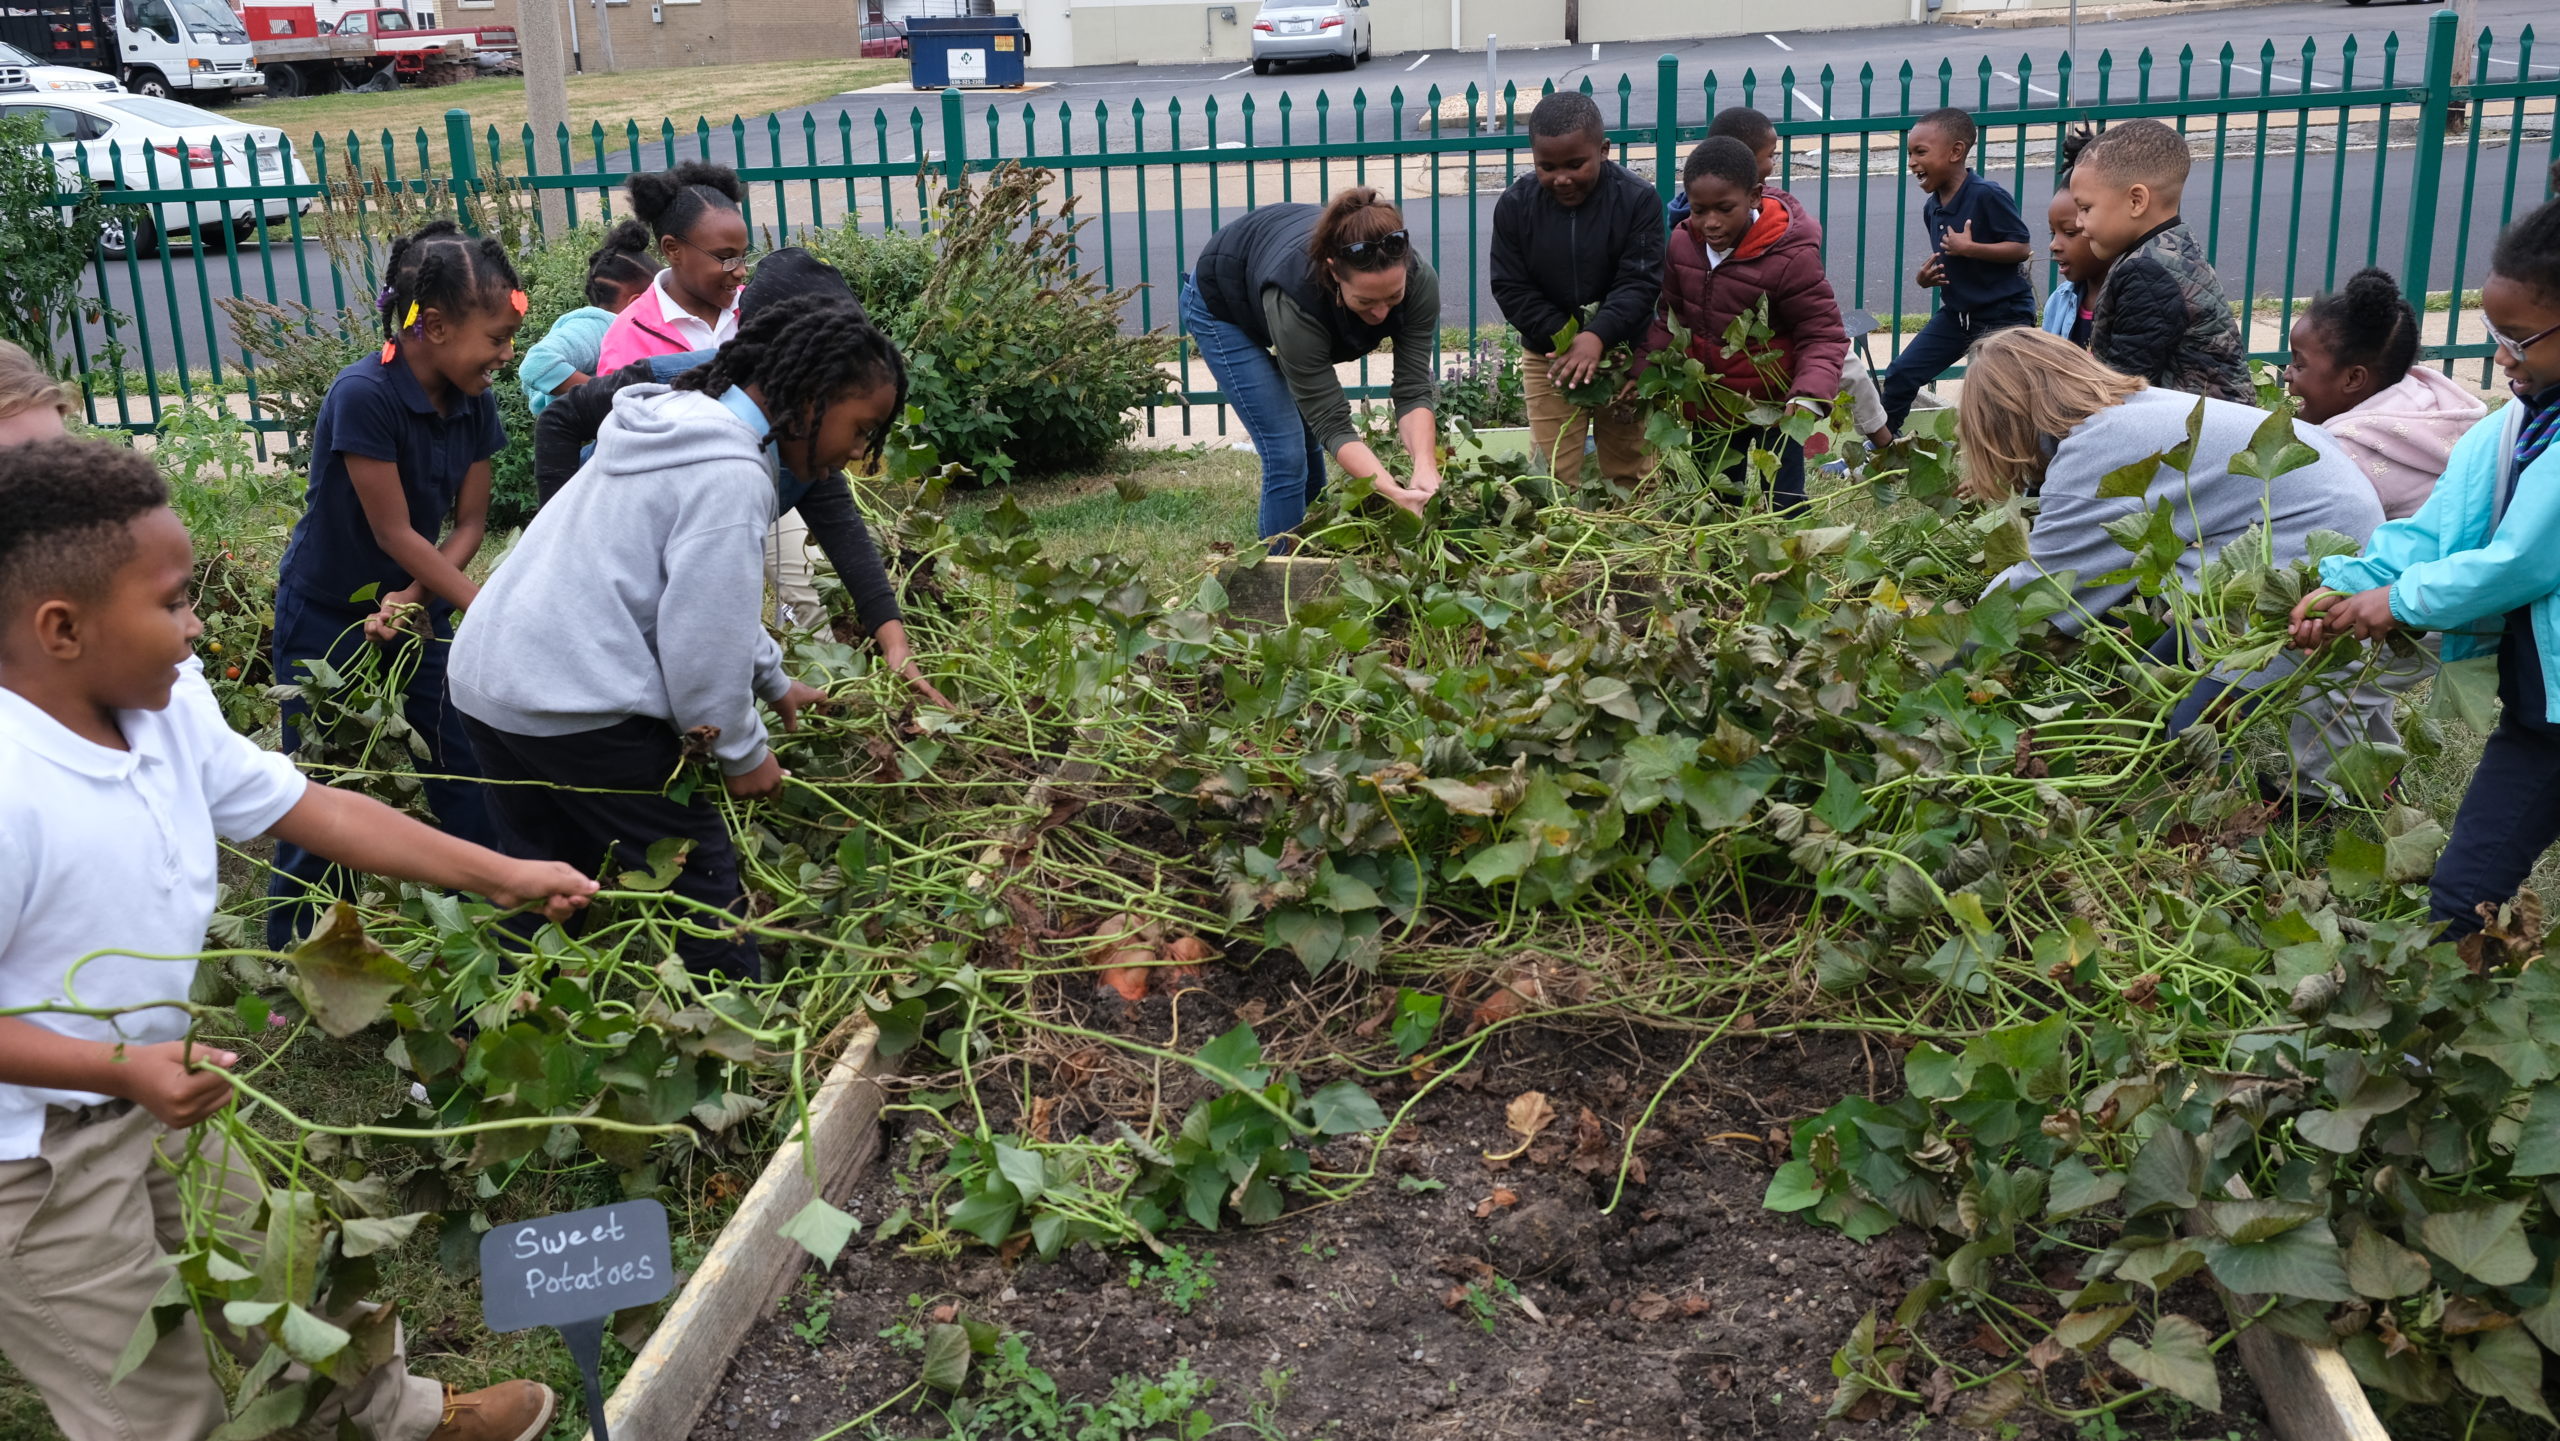 children removing the sweet potato vines from the plants to ready the roots for digging